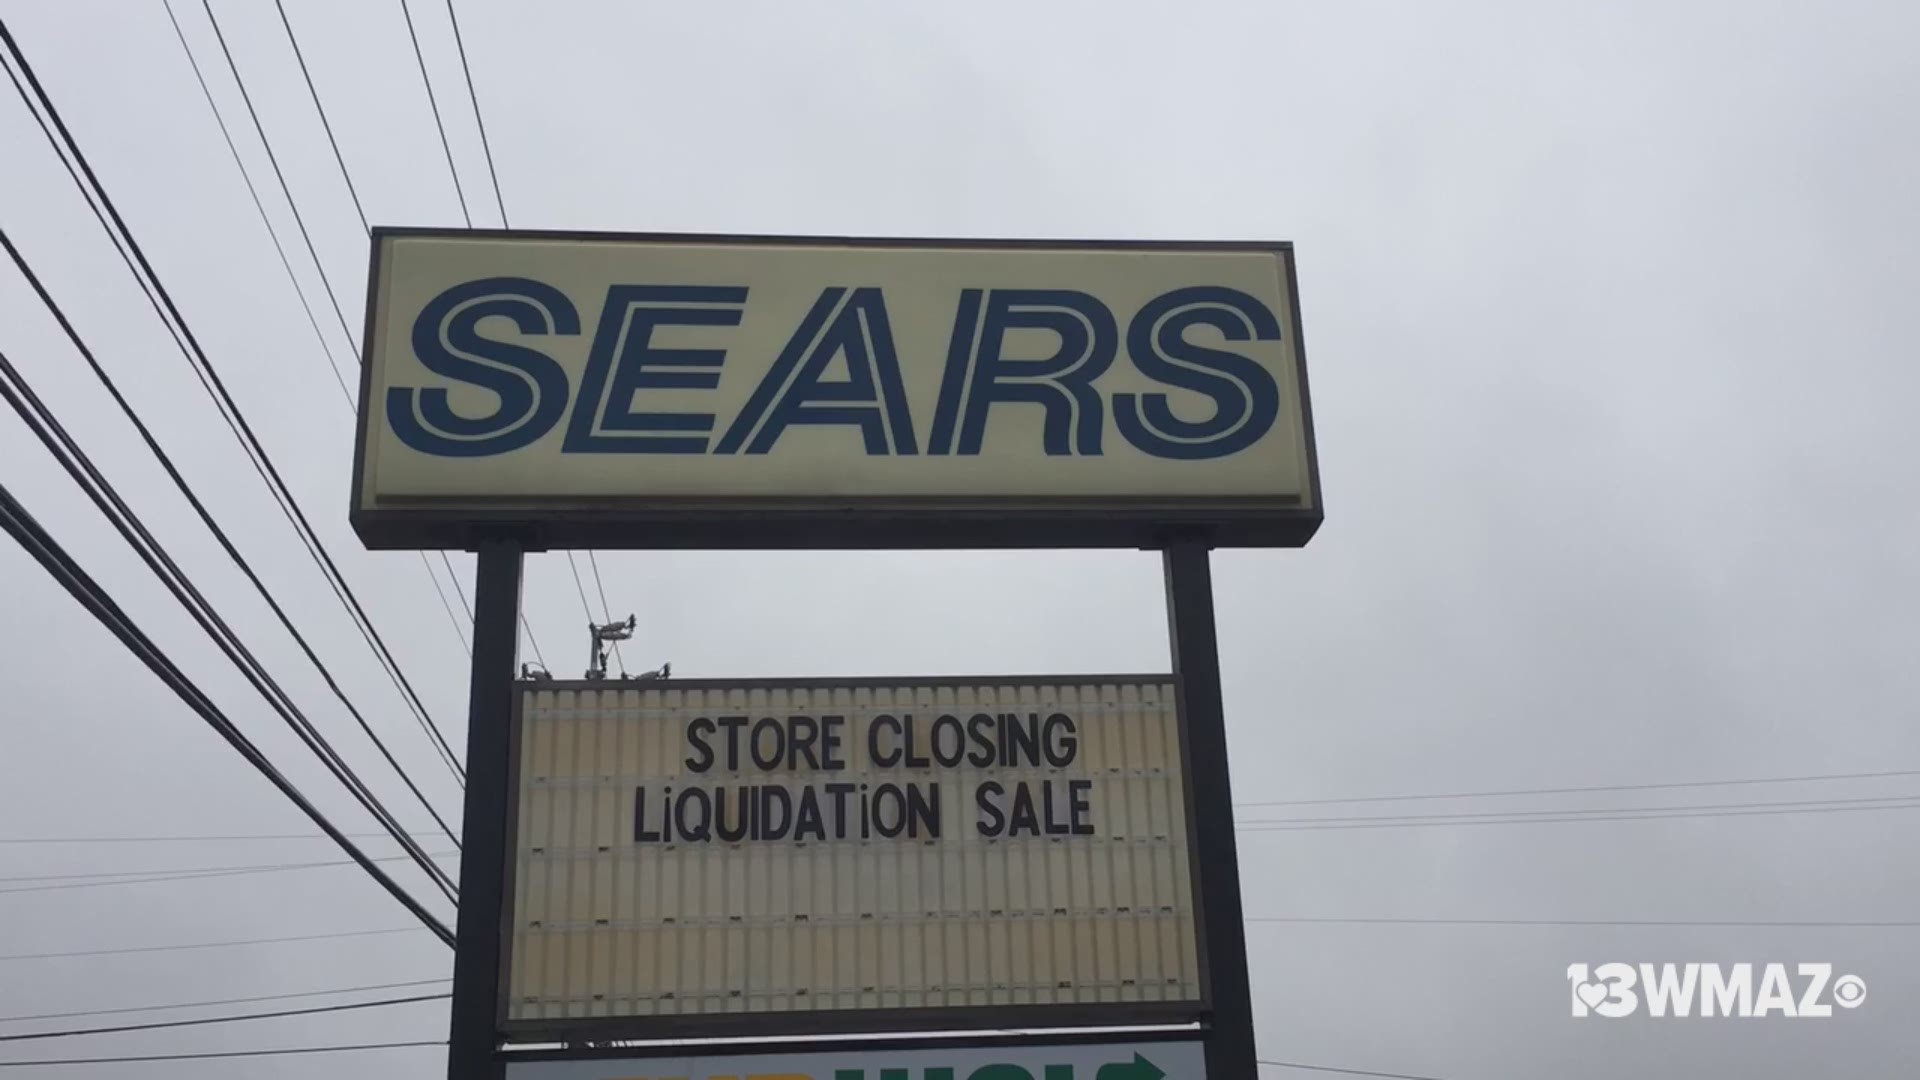 The Sears in Milledgeville will be closing soon and is having a liquidation sale